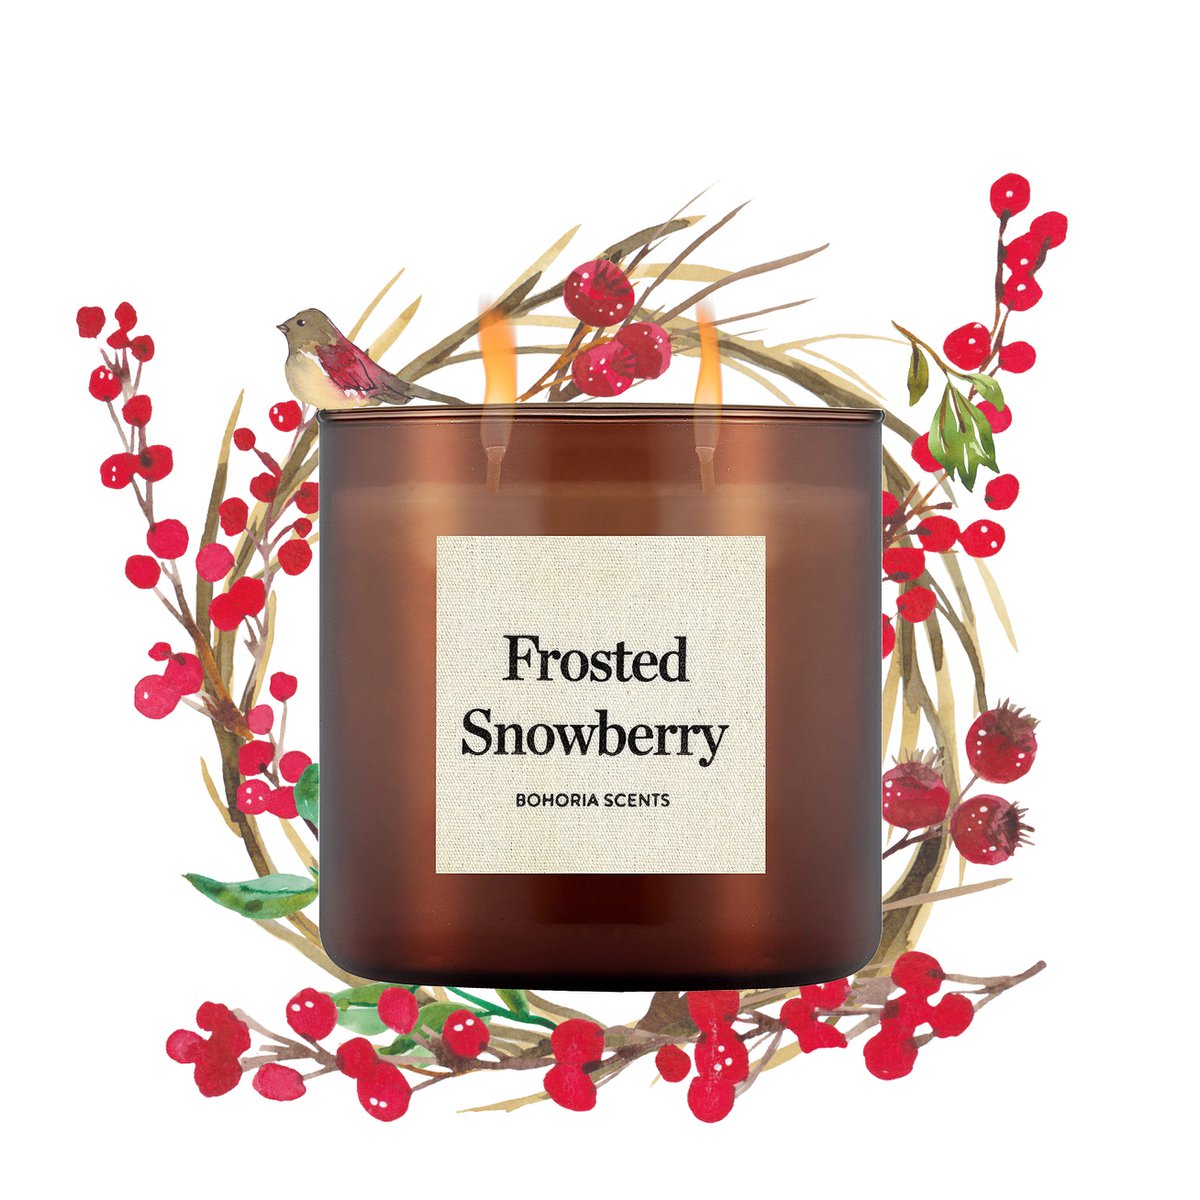 Bohoria Scented Candle Frosted Snowberry